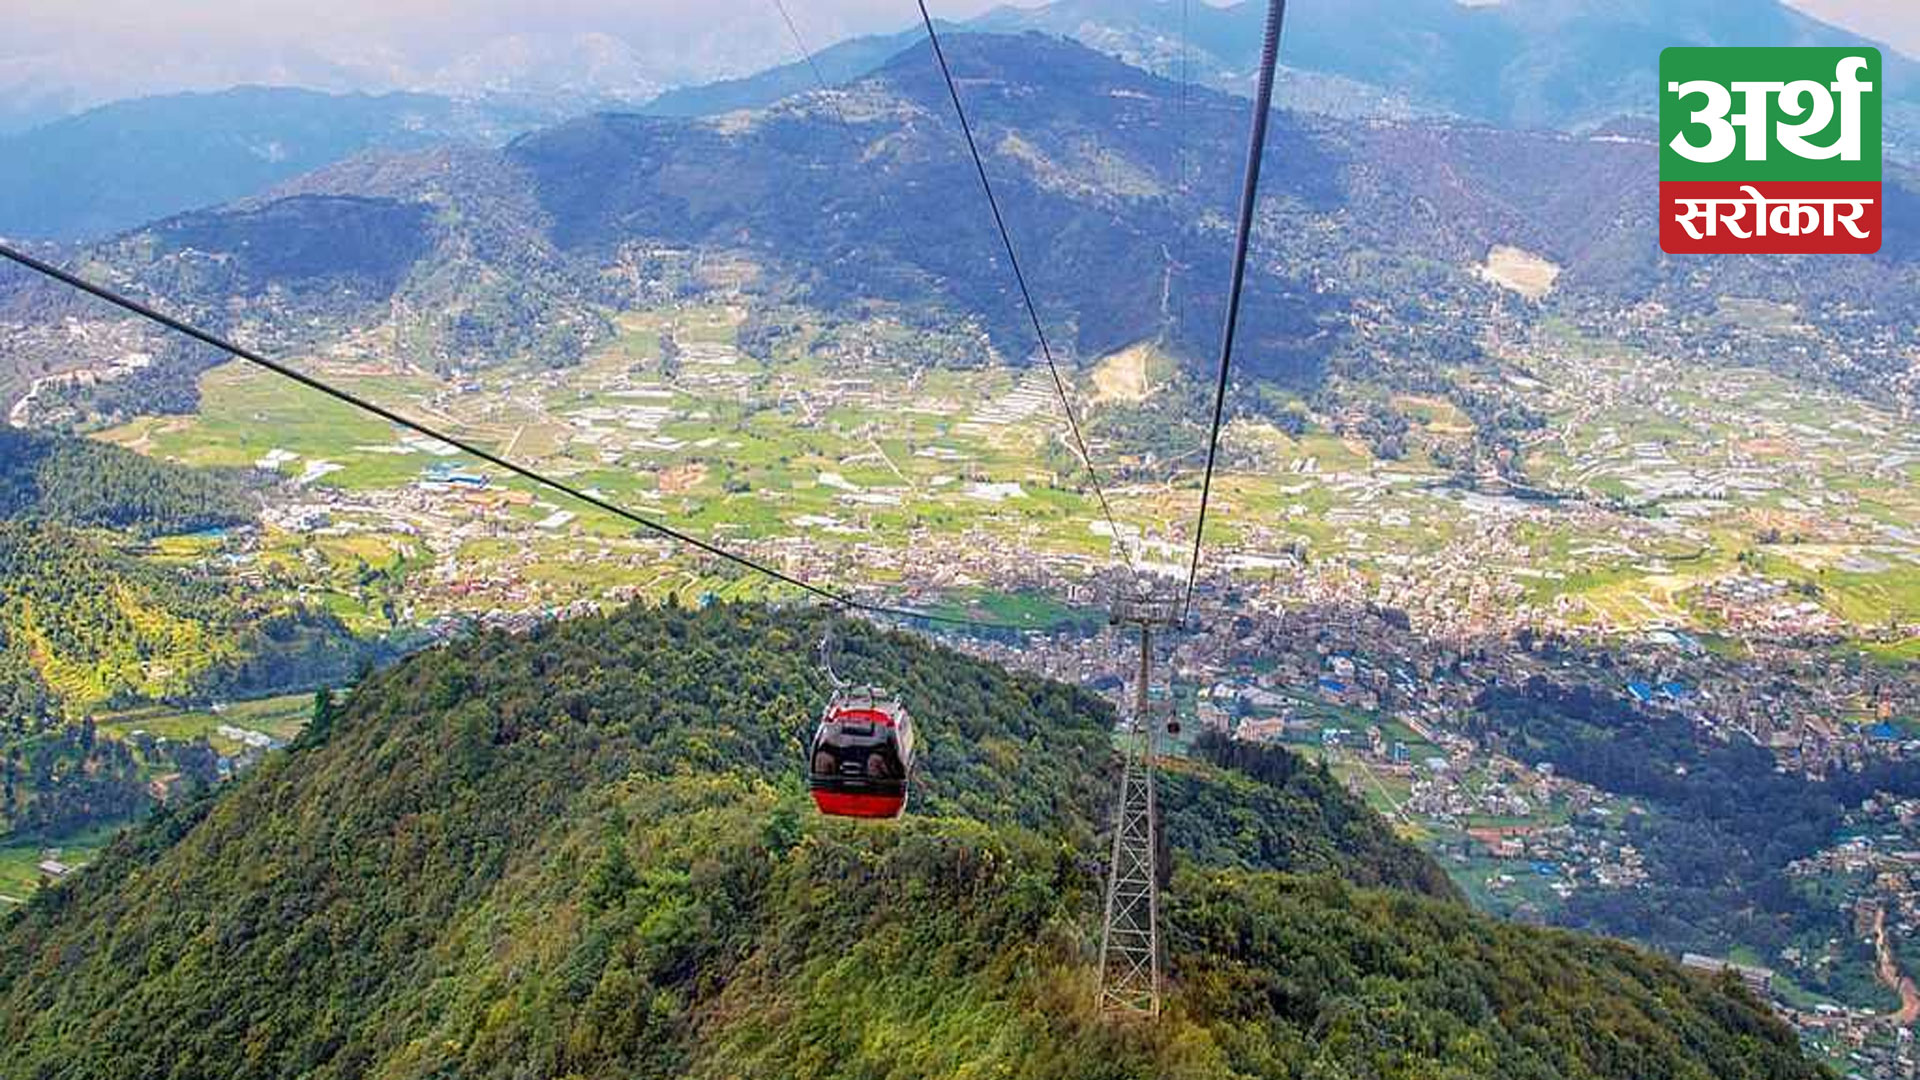 Those who do not get IPO of Chandragiri Hills will get 25% discount on Chandragiri Cable Car